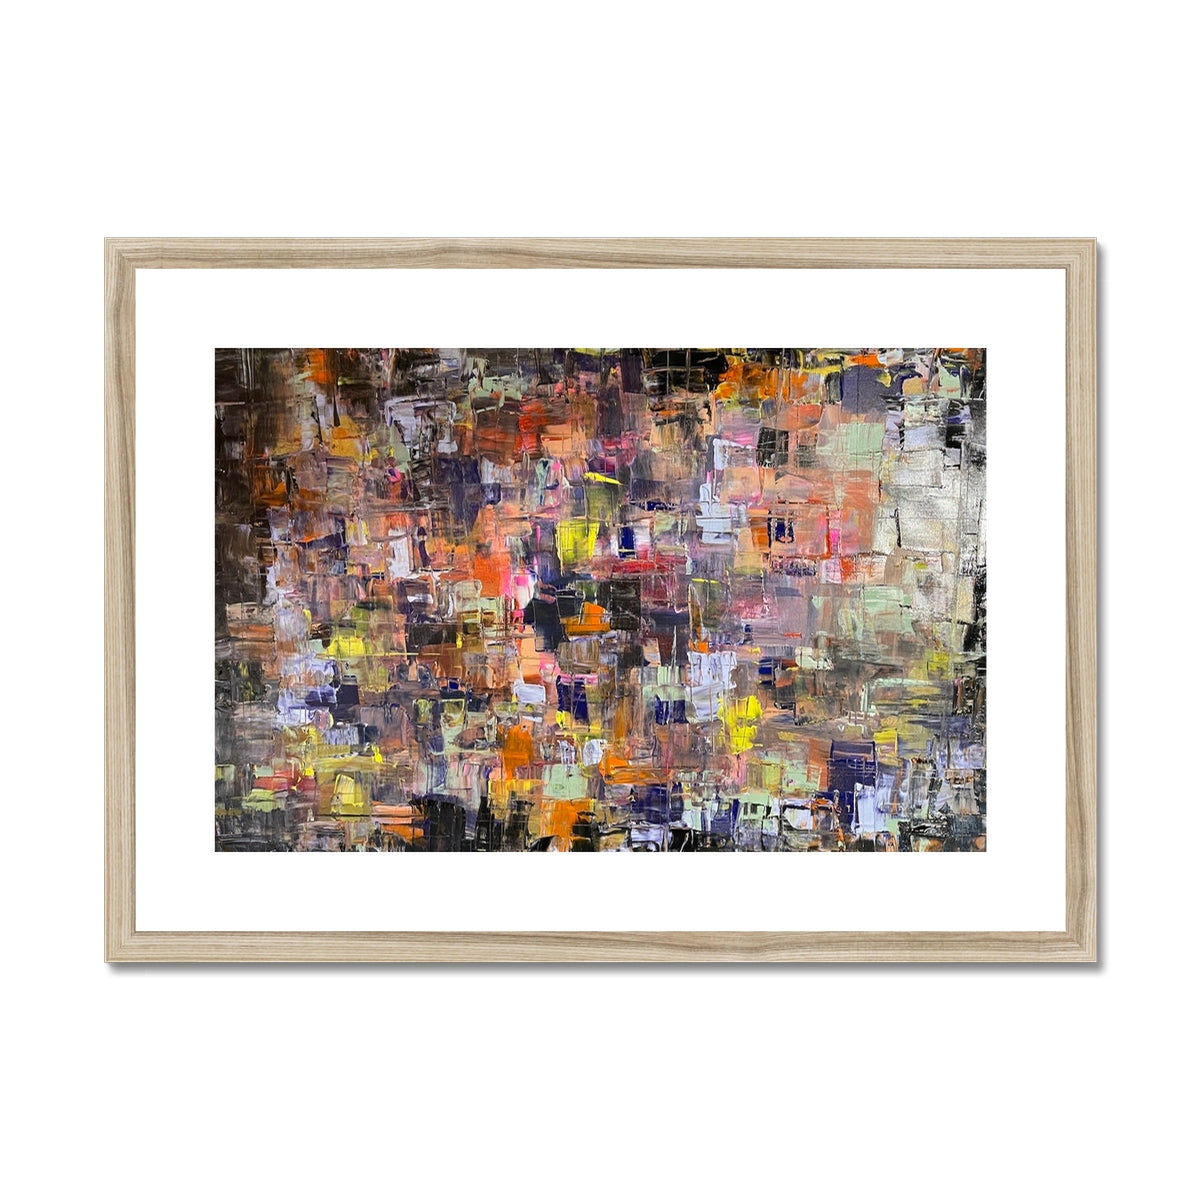 Never Enough Abstract Painting | Framed & Mounted Prints From Scotland-Framed & Mounted Prints-Abstract & Impressionistic Art Gallery-A2 Landscape-Natural Frame-Paintings, Prints, Homeware, Art Gifts From Scotland By Scottish Artist Kevin Hunter